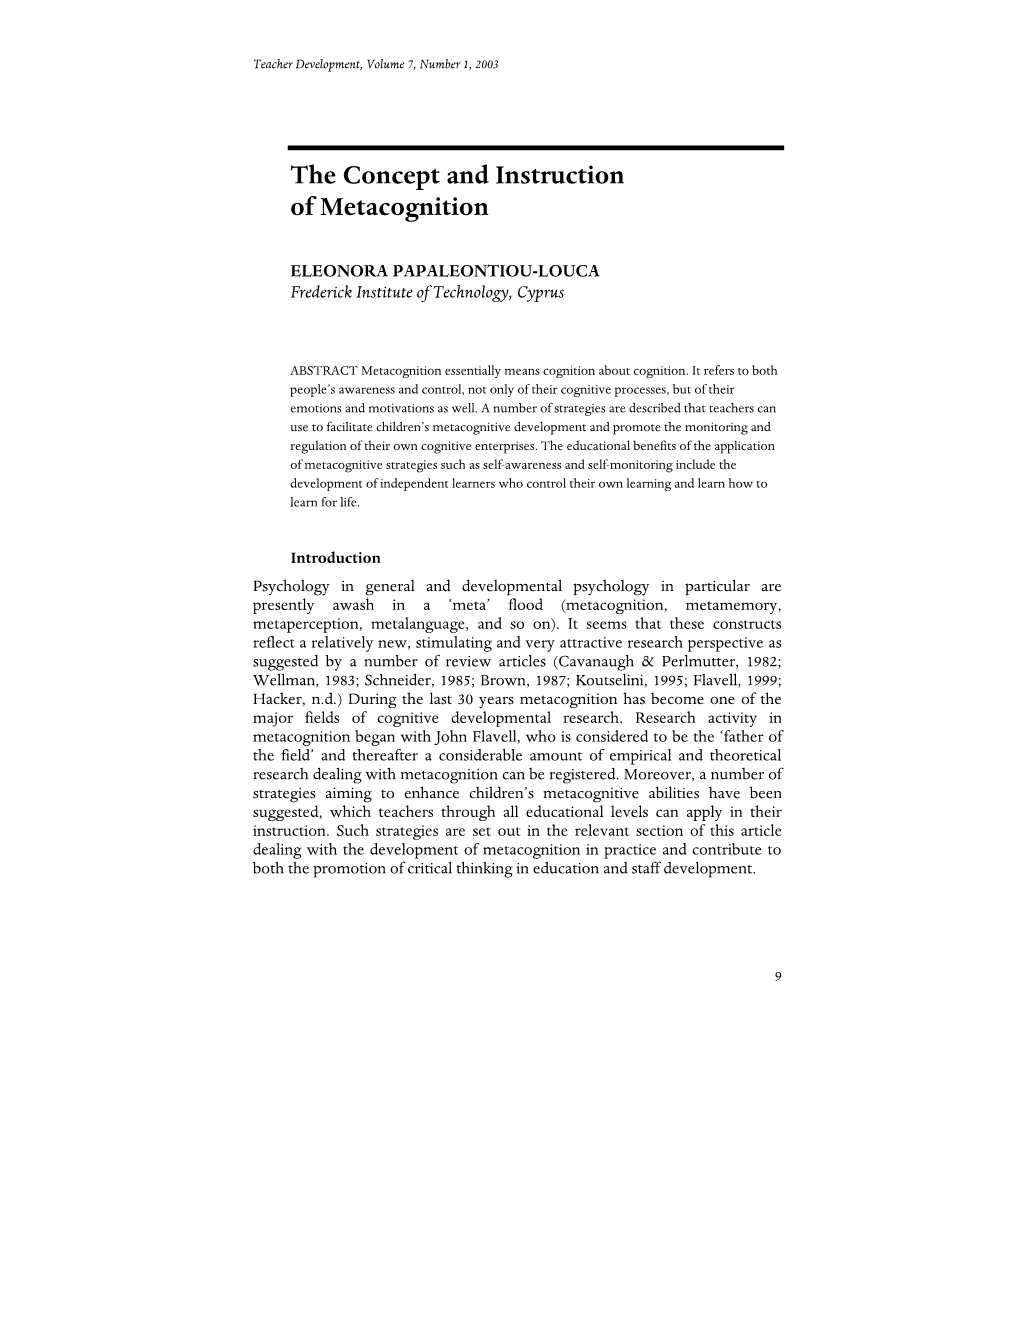 The Concept and Instruction of Metacognition